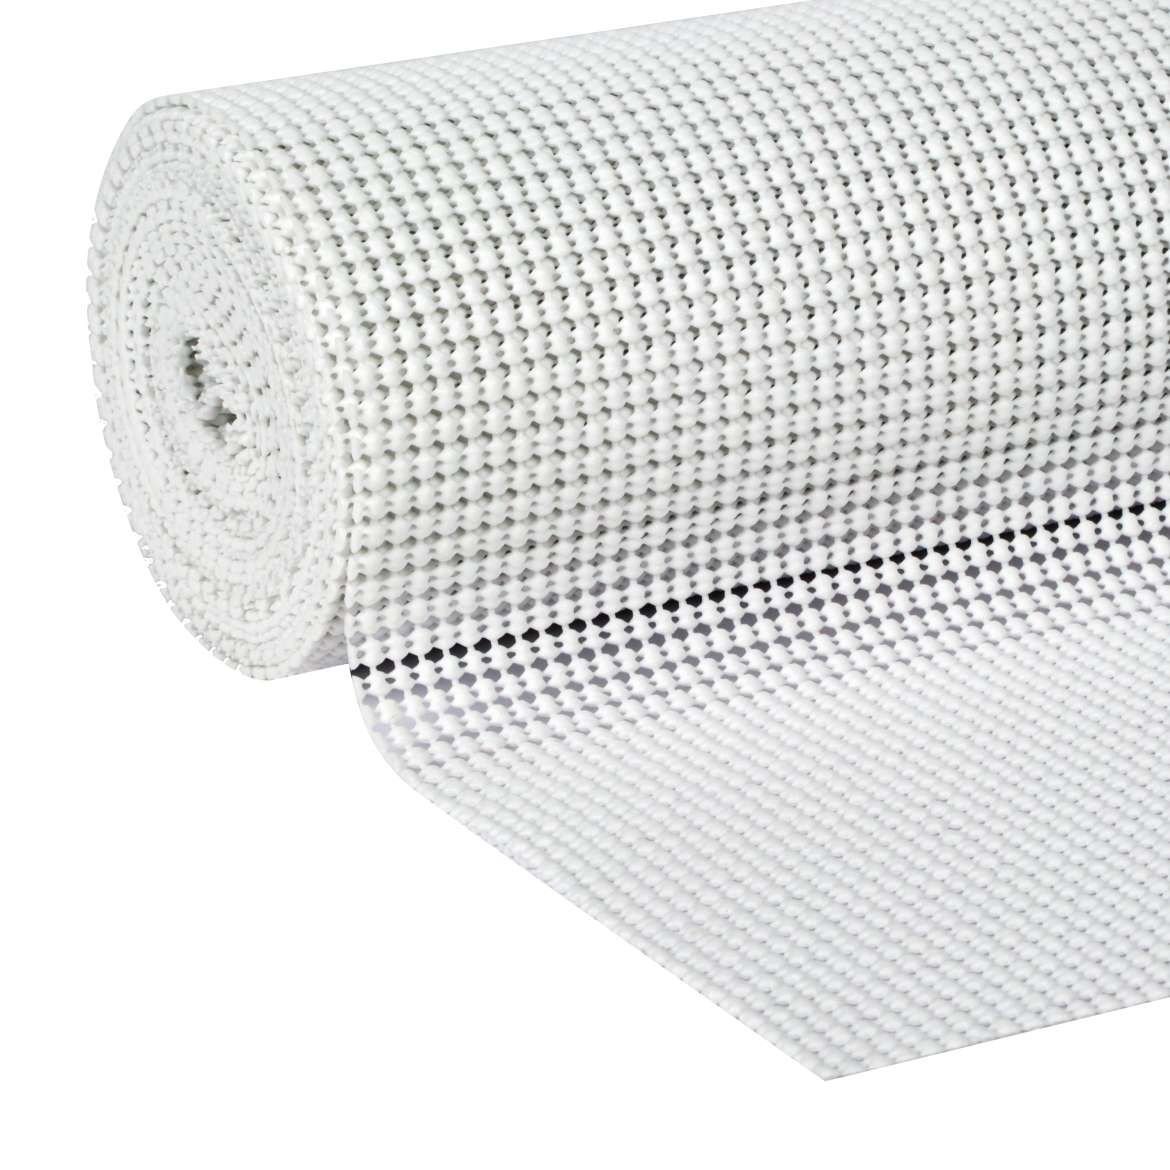 Duck EasyLiner Select Grip Non-Adhesive Shelf and Drawer Liner, Gray, 12 x  10' Roll, 2 Rolls